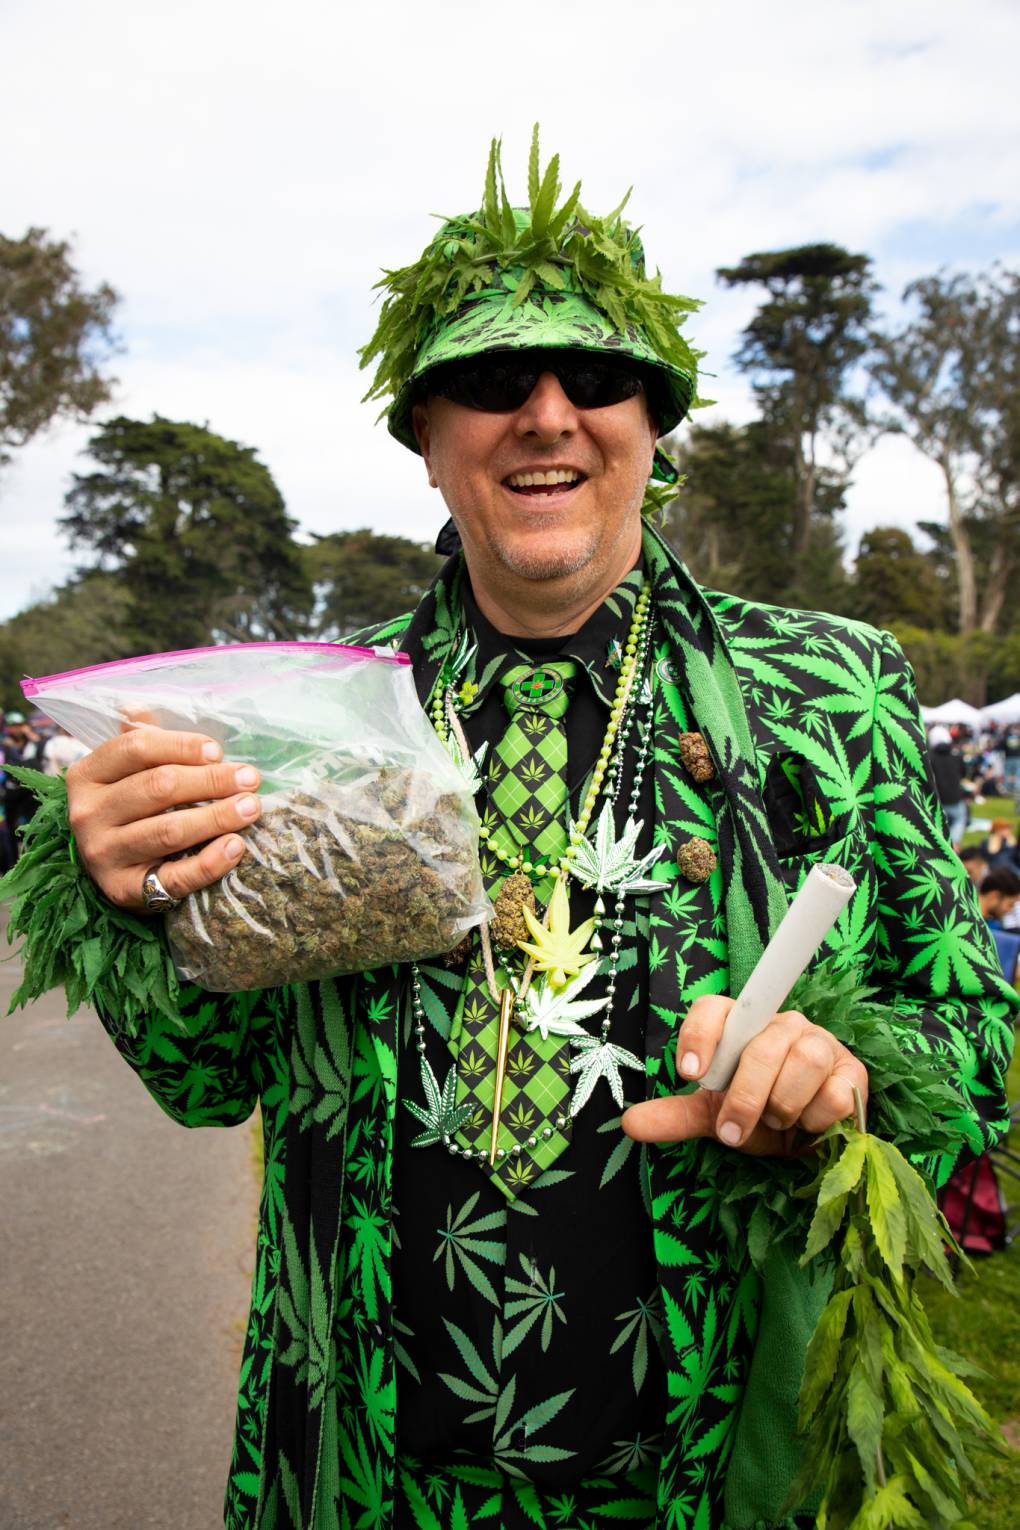 A middle-aged white man holds a bag of marijuana and a large joint, dressed in a marijuana-themed suit and bucket hat covered in leaves.